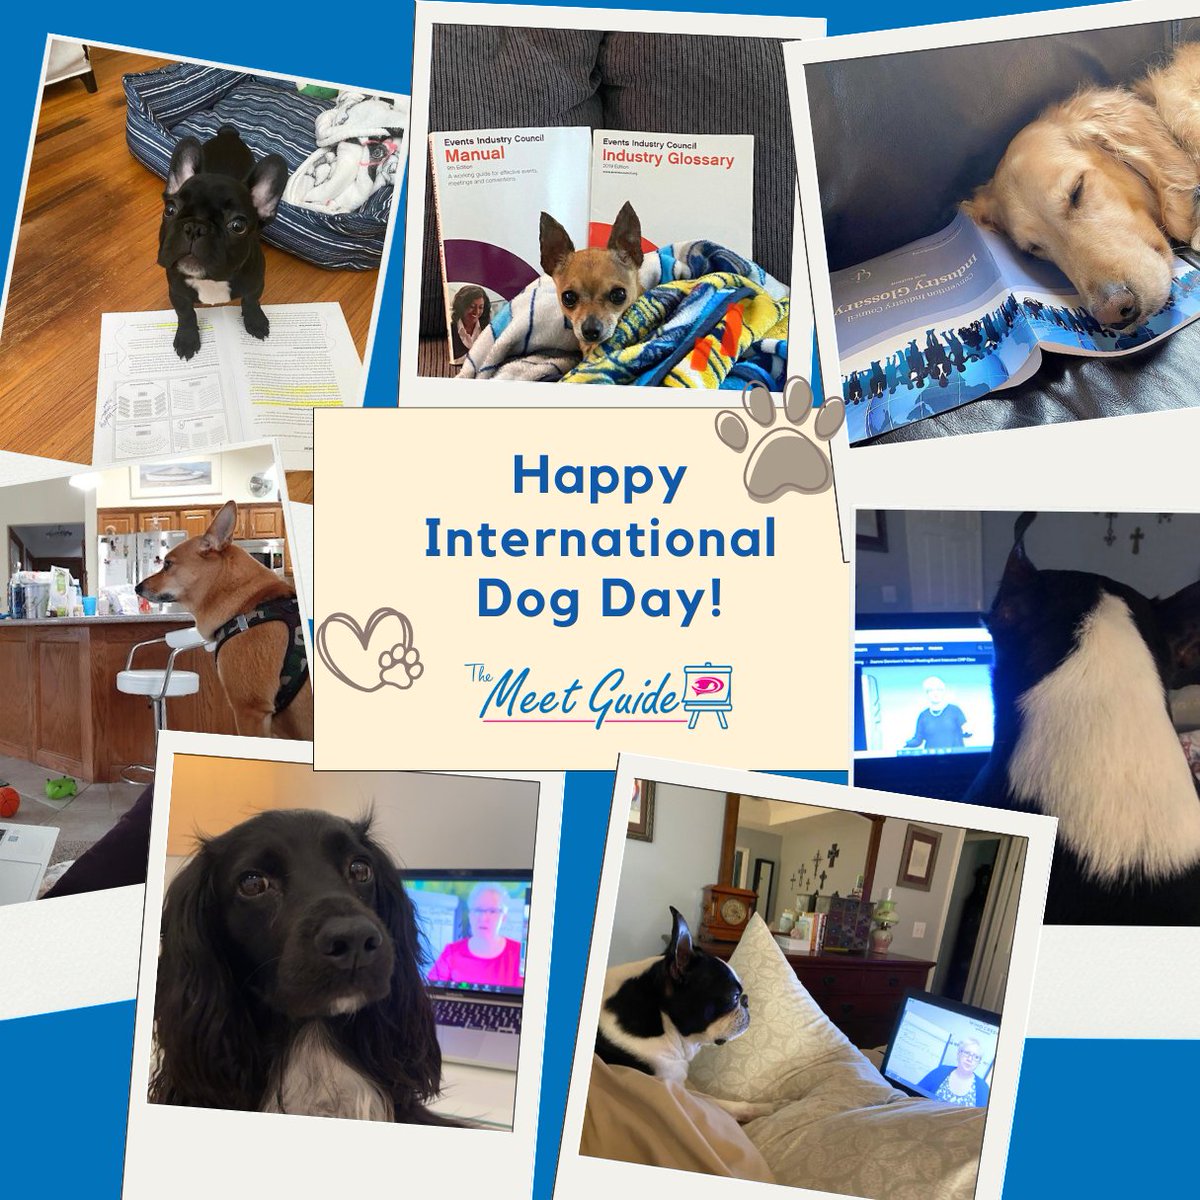 A day late, but I couldn’t go without saying happy International Dog Day to our furry friends!🐾

These are some adorable fur babies/study buddies who have sat in on my virtual CMP classes over the years!

#internationaldogday #themeetguide #cmp #meetingsandevents #meetingprofs